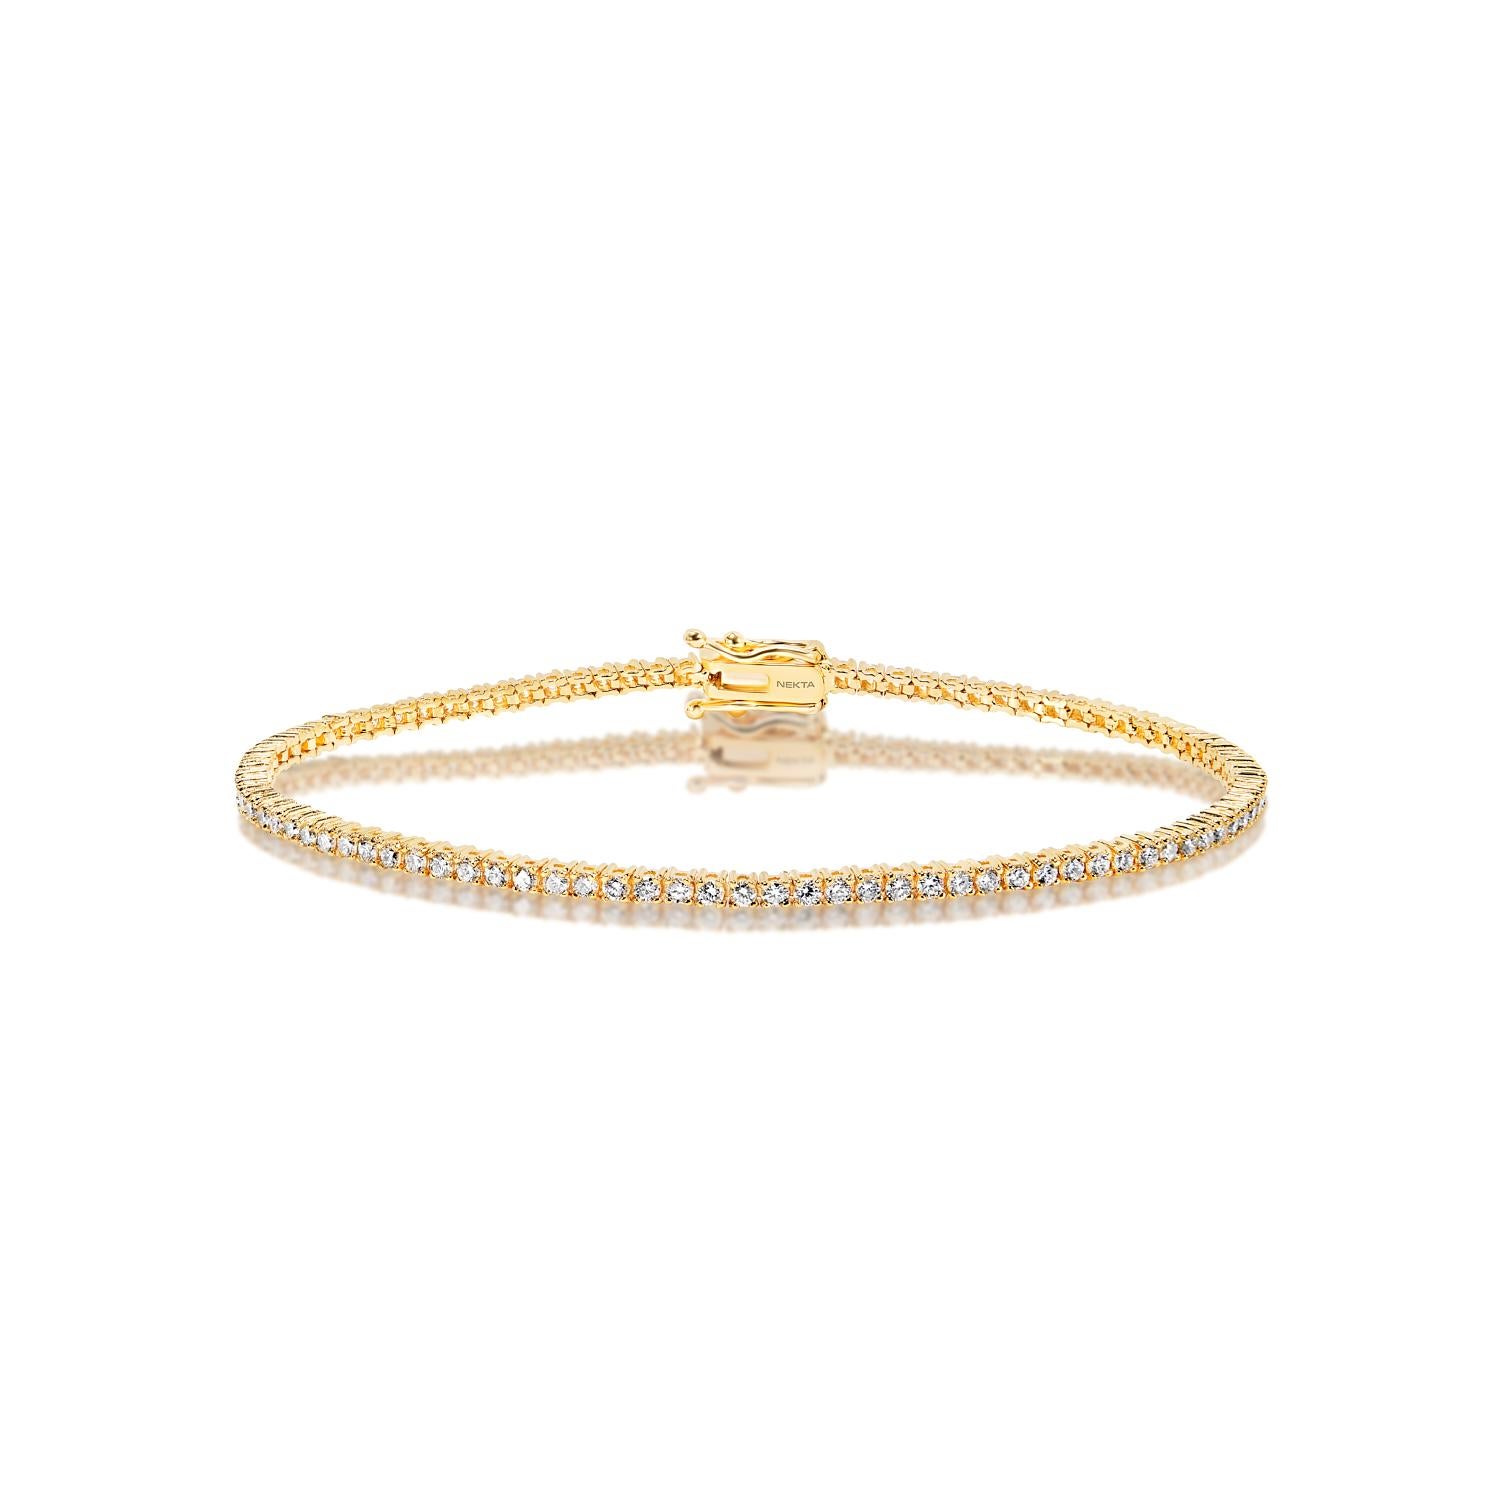 The NAYELI 2 pointers each stone Diamond Tennis Bracelet features ROUND BRILLIANT CUT DIAMONDS brilliants weighing a total of approximately 2 pointers each stone 1 carat total, set in 14K Yellow Gold.

Diamonds: 50
Diamond Size: 1 Carat
Diamond